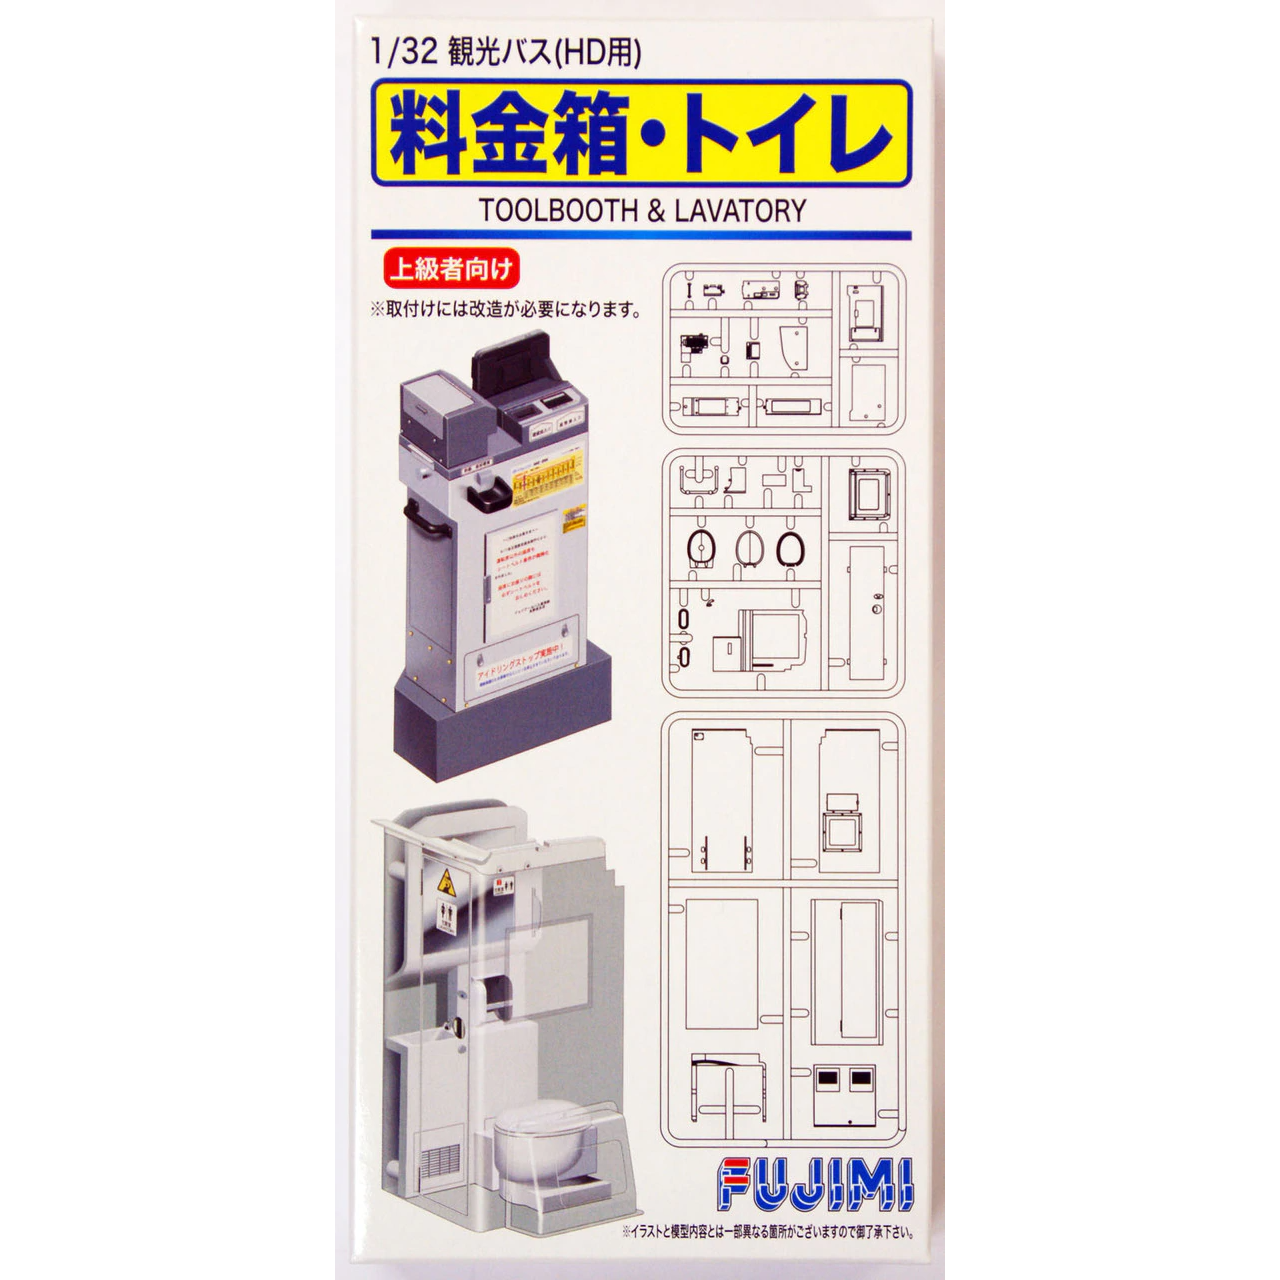 Tollbooth and Rest Room #112619 1/32 Scenery Kit by Fujimi